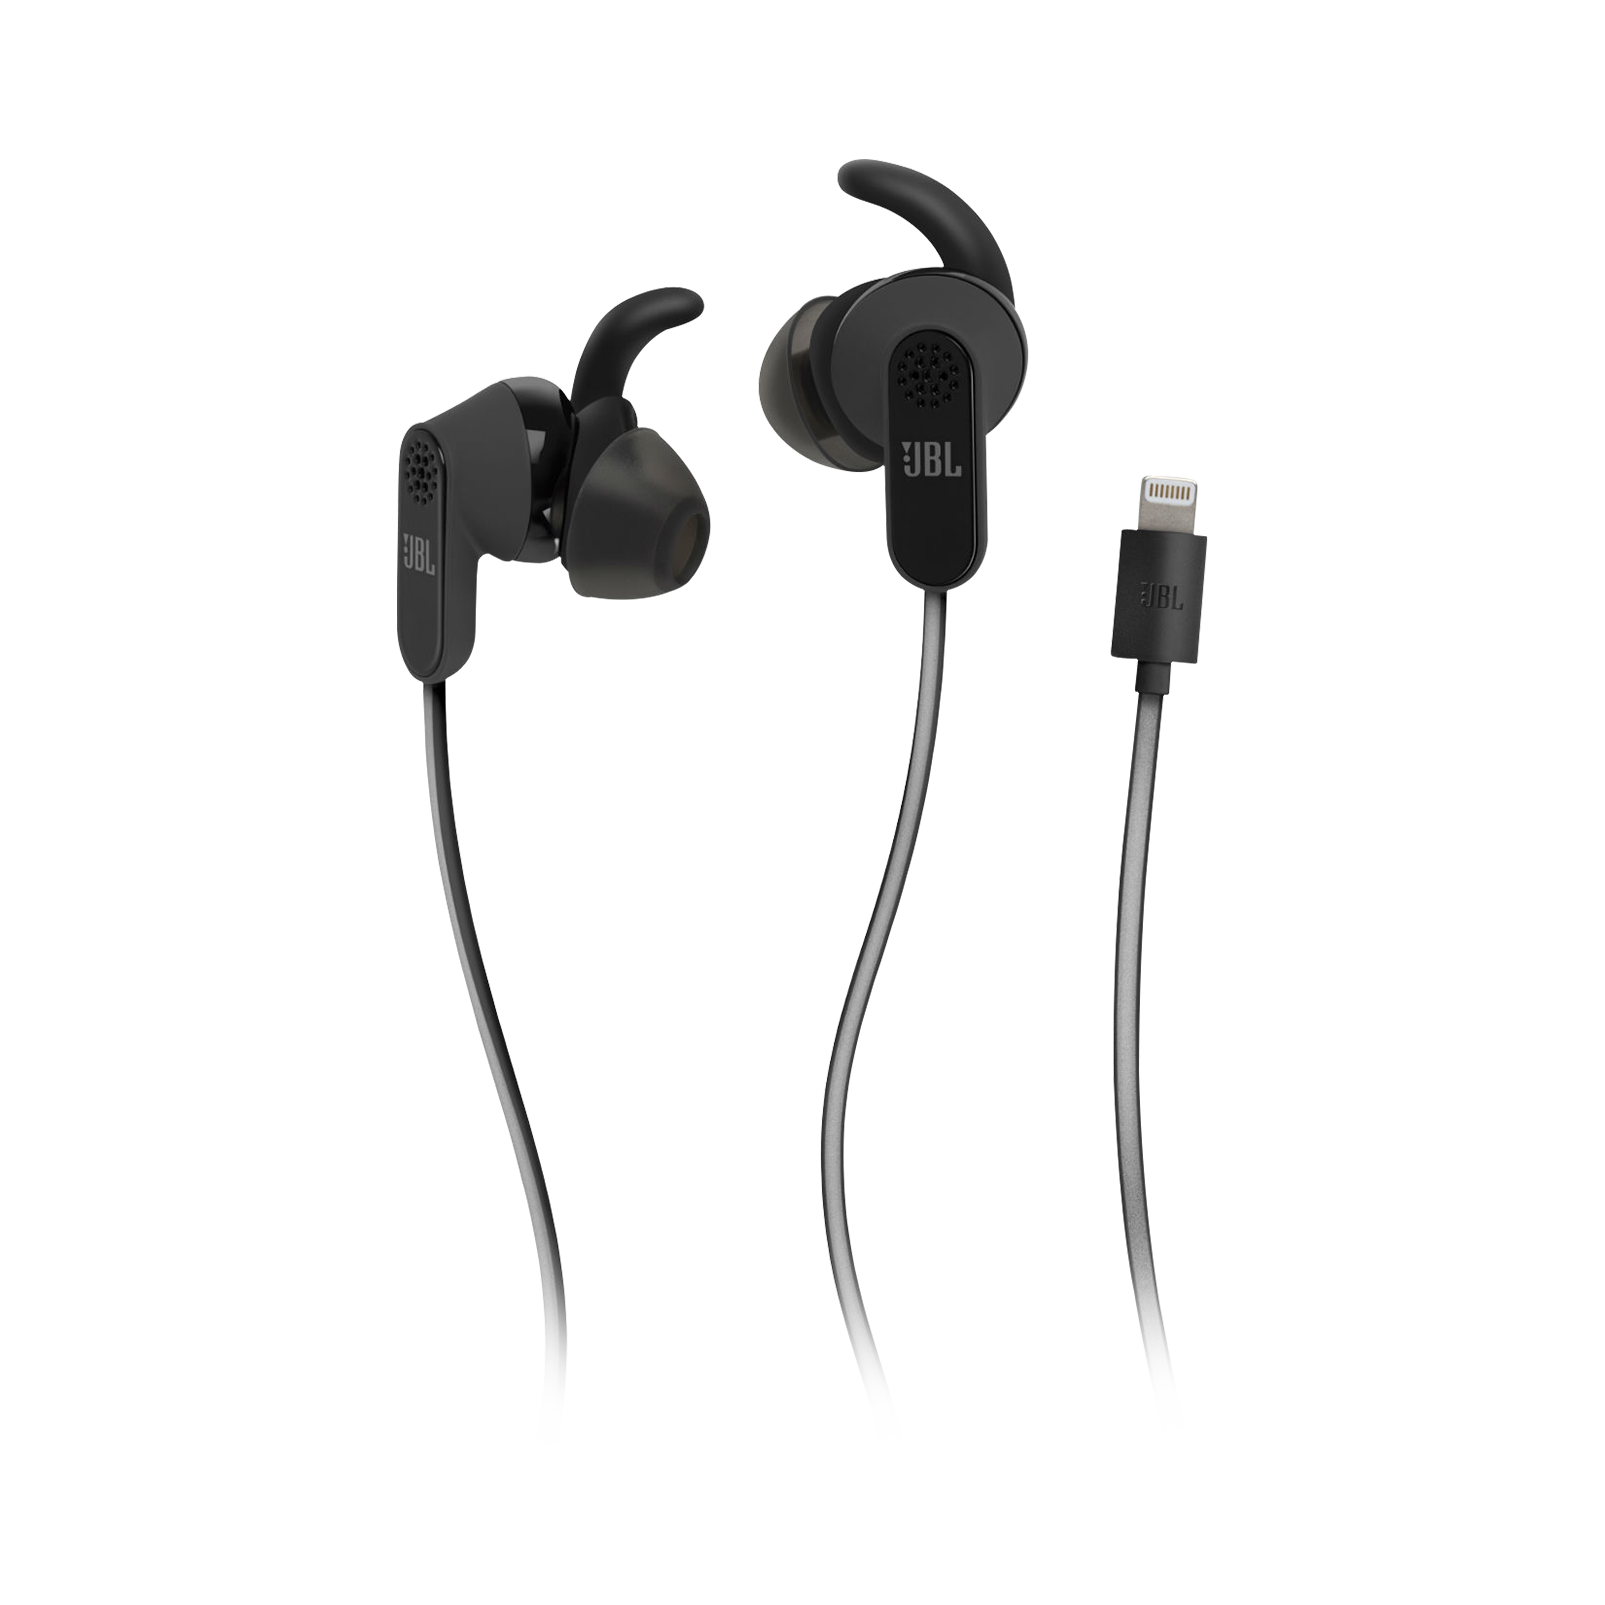 Save $170 on Reflect Aware. Lightning Connector Sport Earphone with Adaptive Noise Control